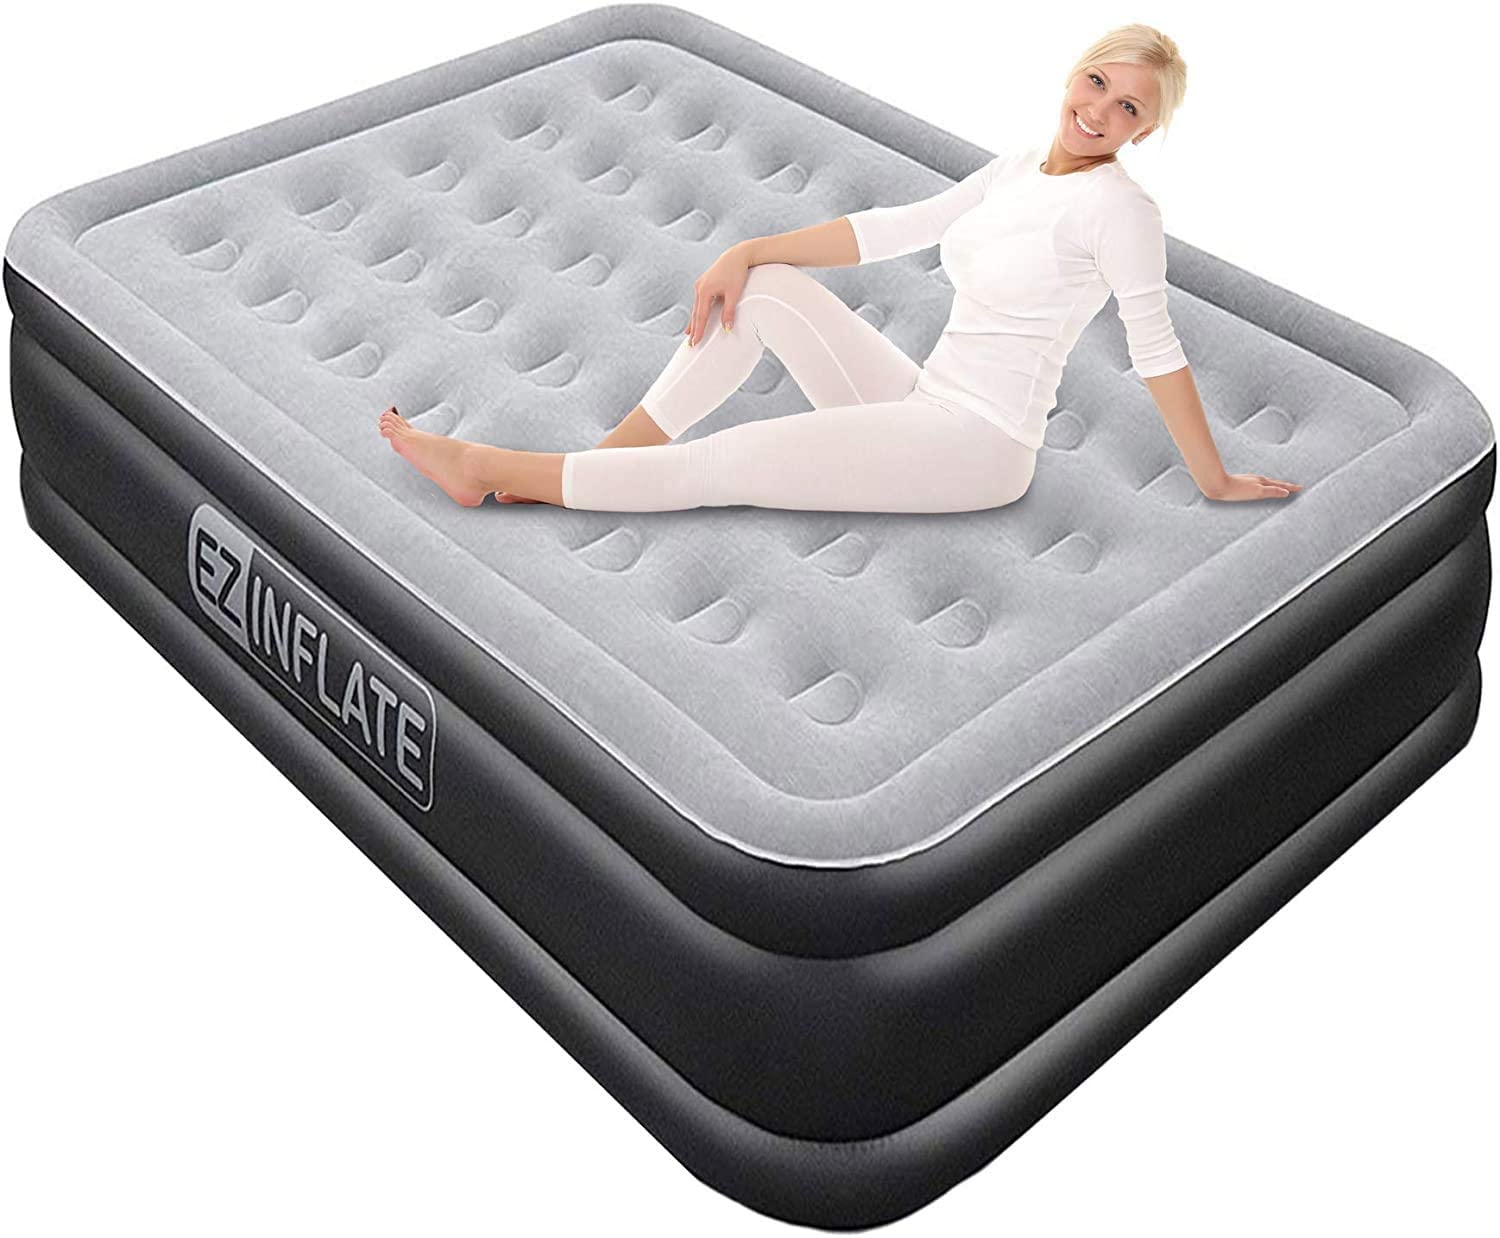 EZ INFLATE Luxury Double High Queen air Mattress with ...